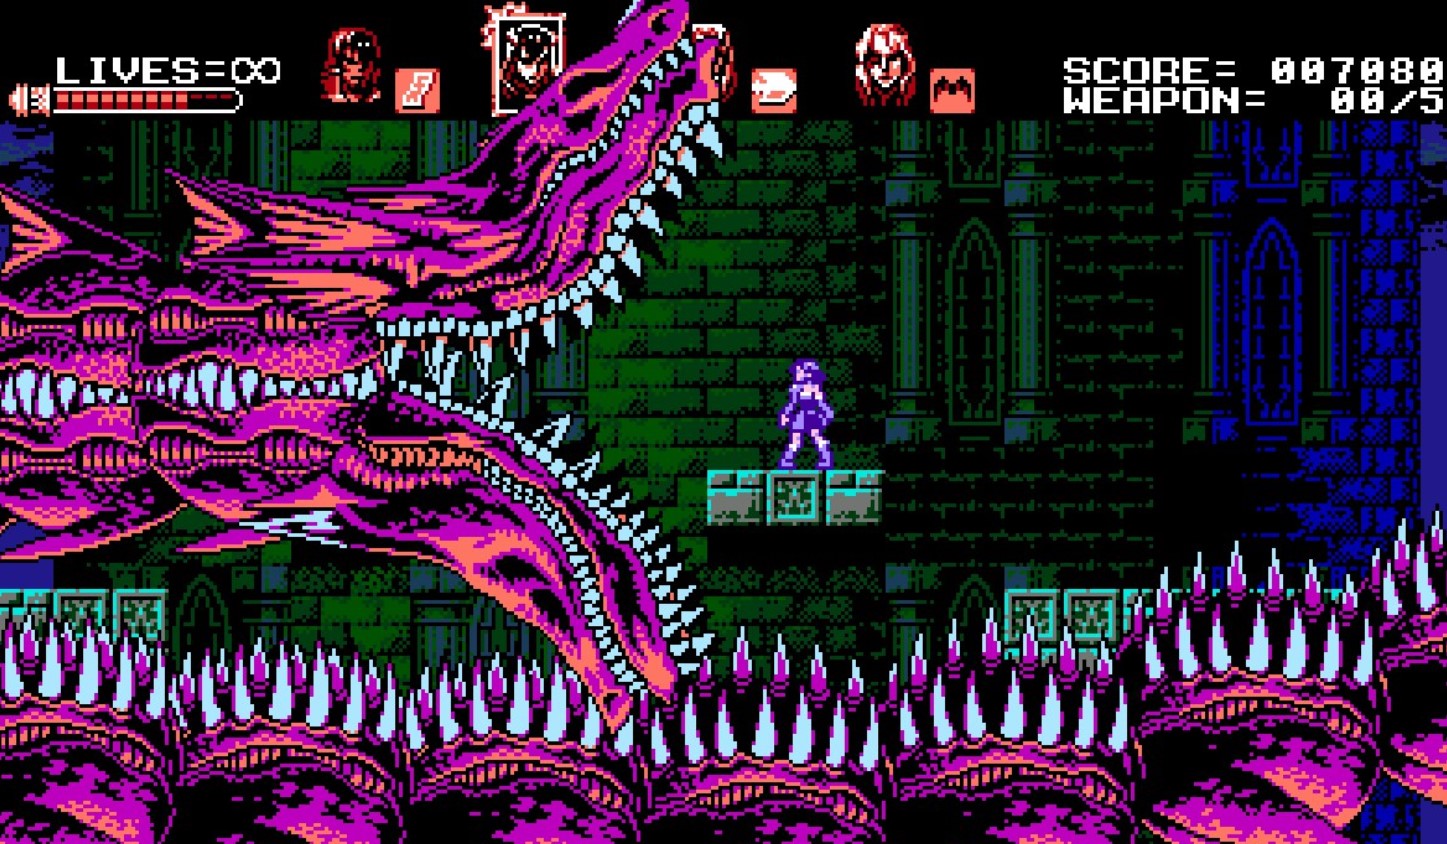 Bloodstained Curse of the moon Review